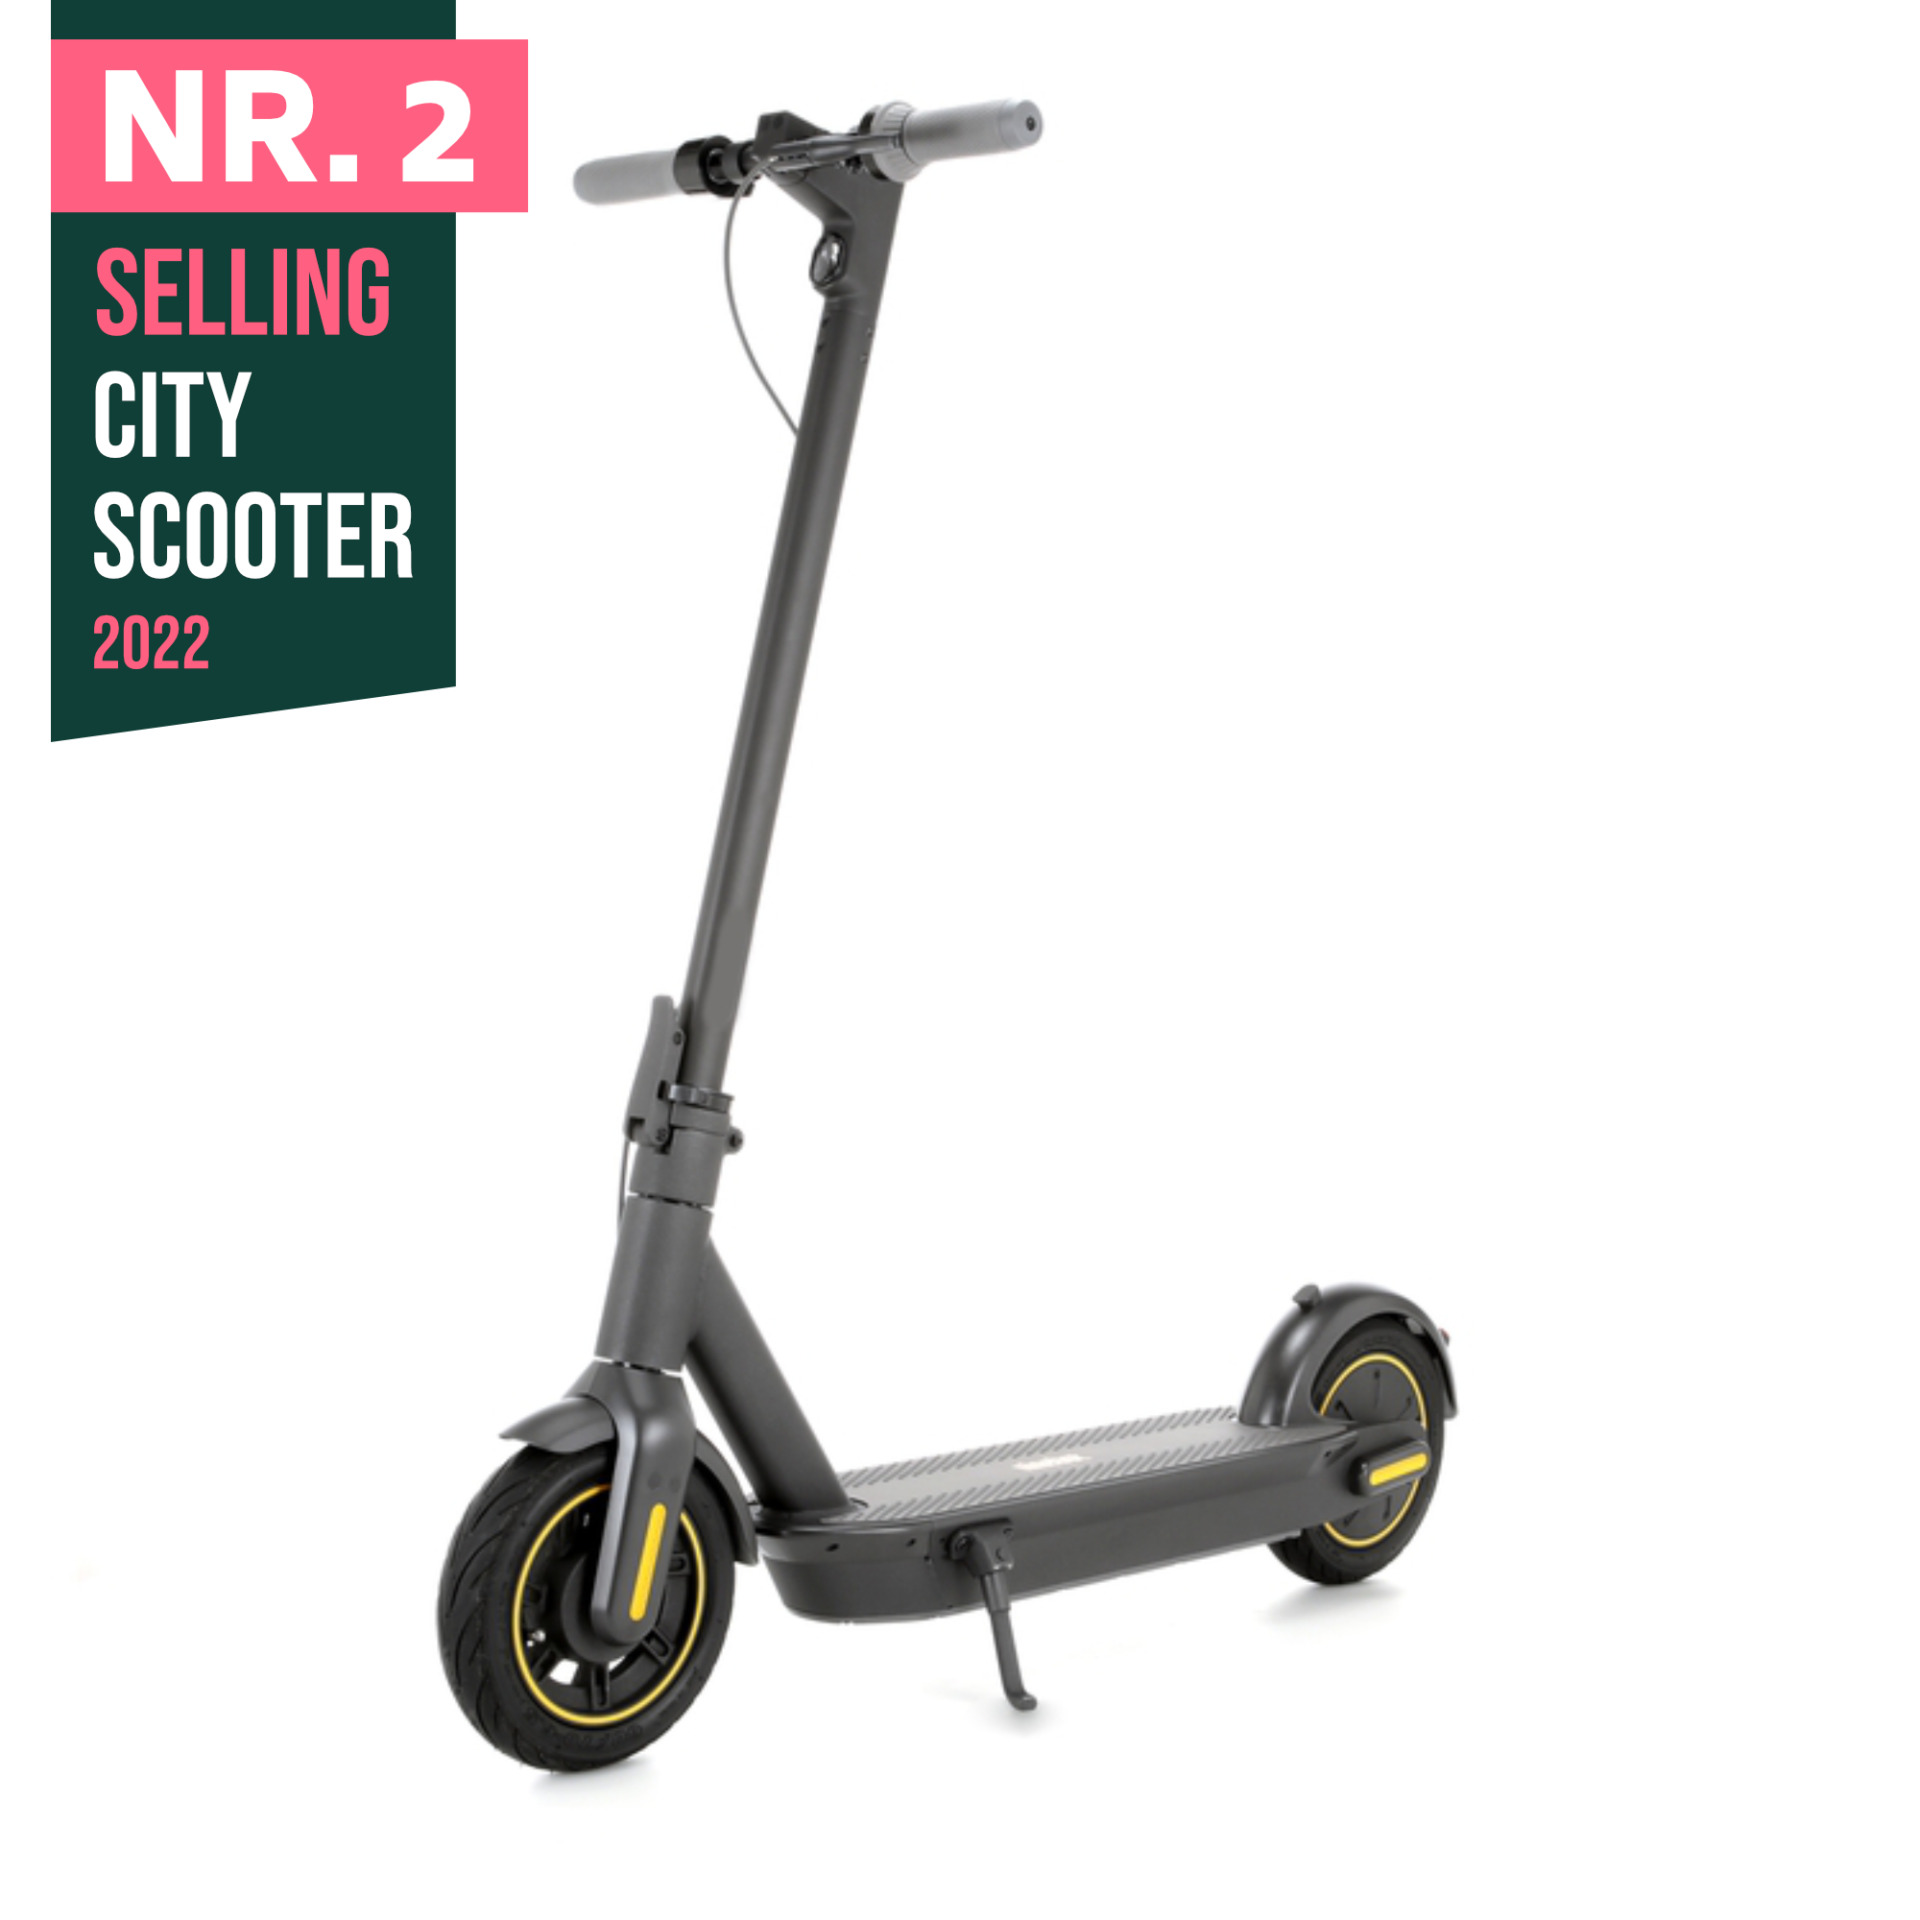 Segway Ninebot Max G30, One of the most loved e-scooter